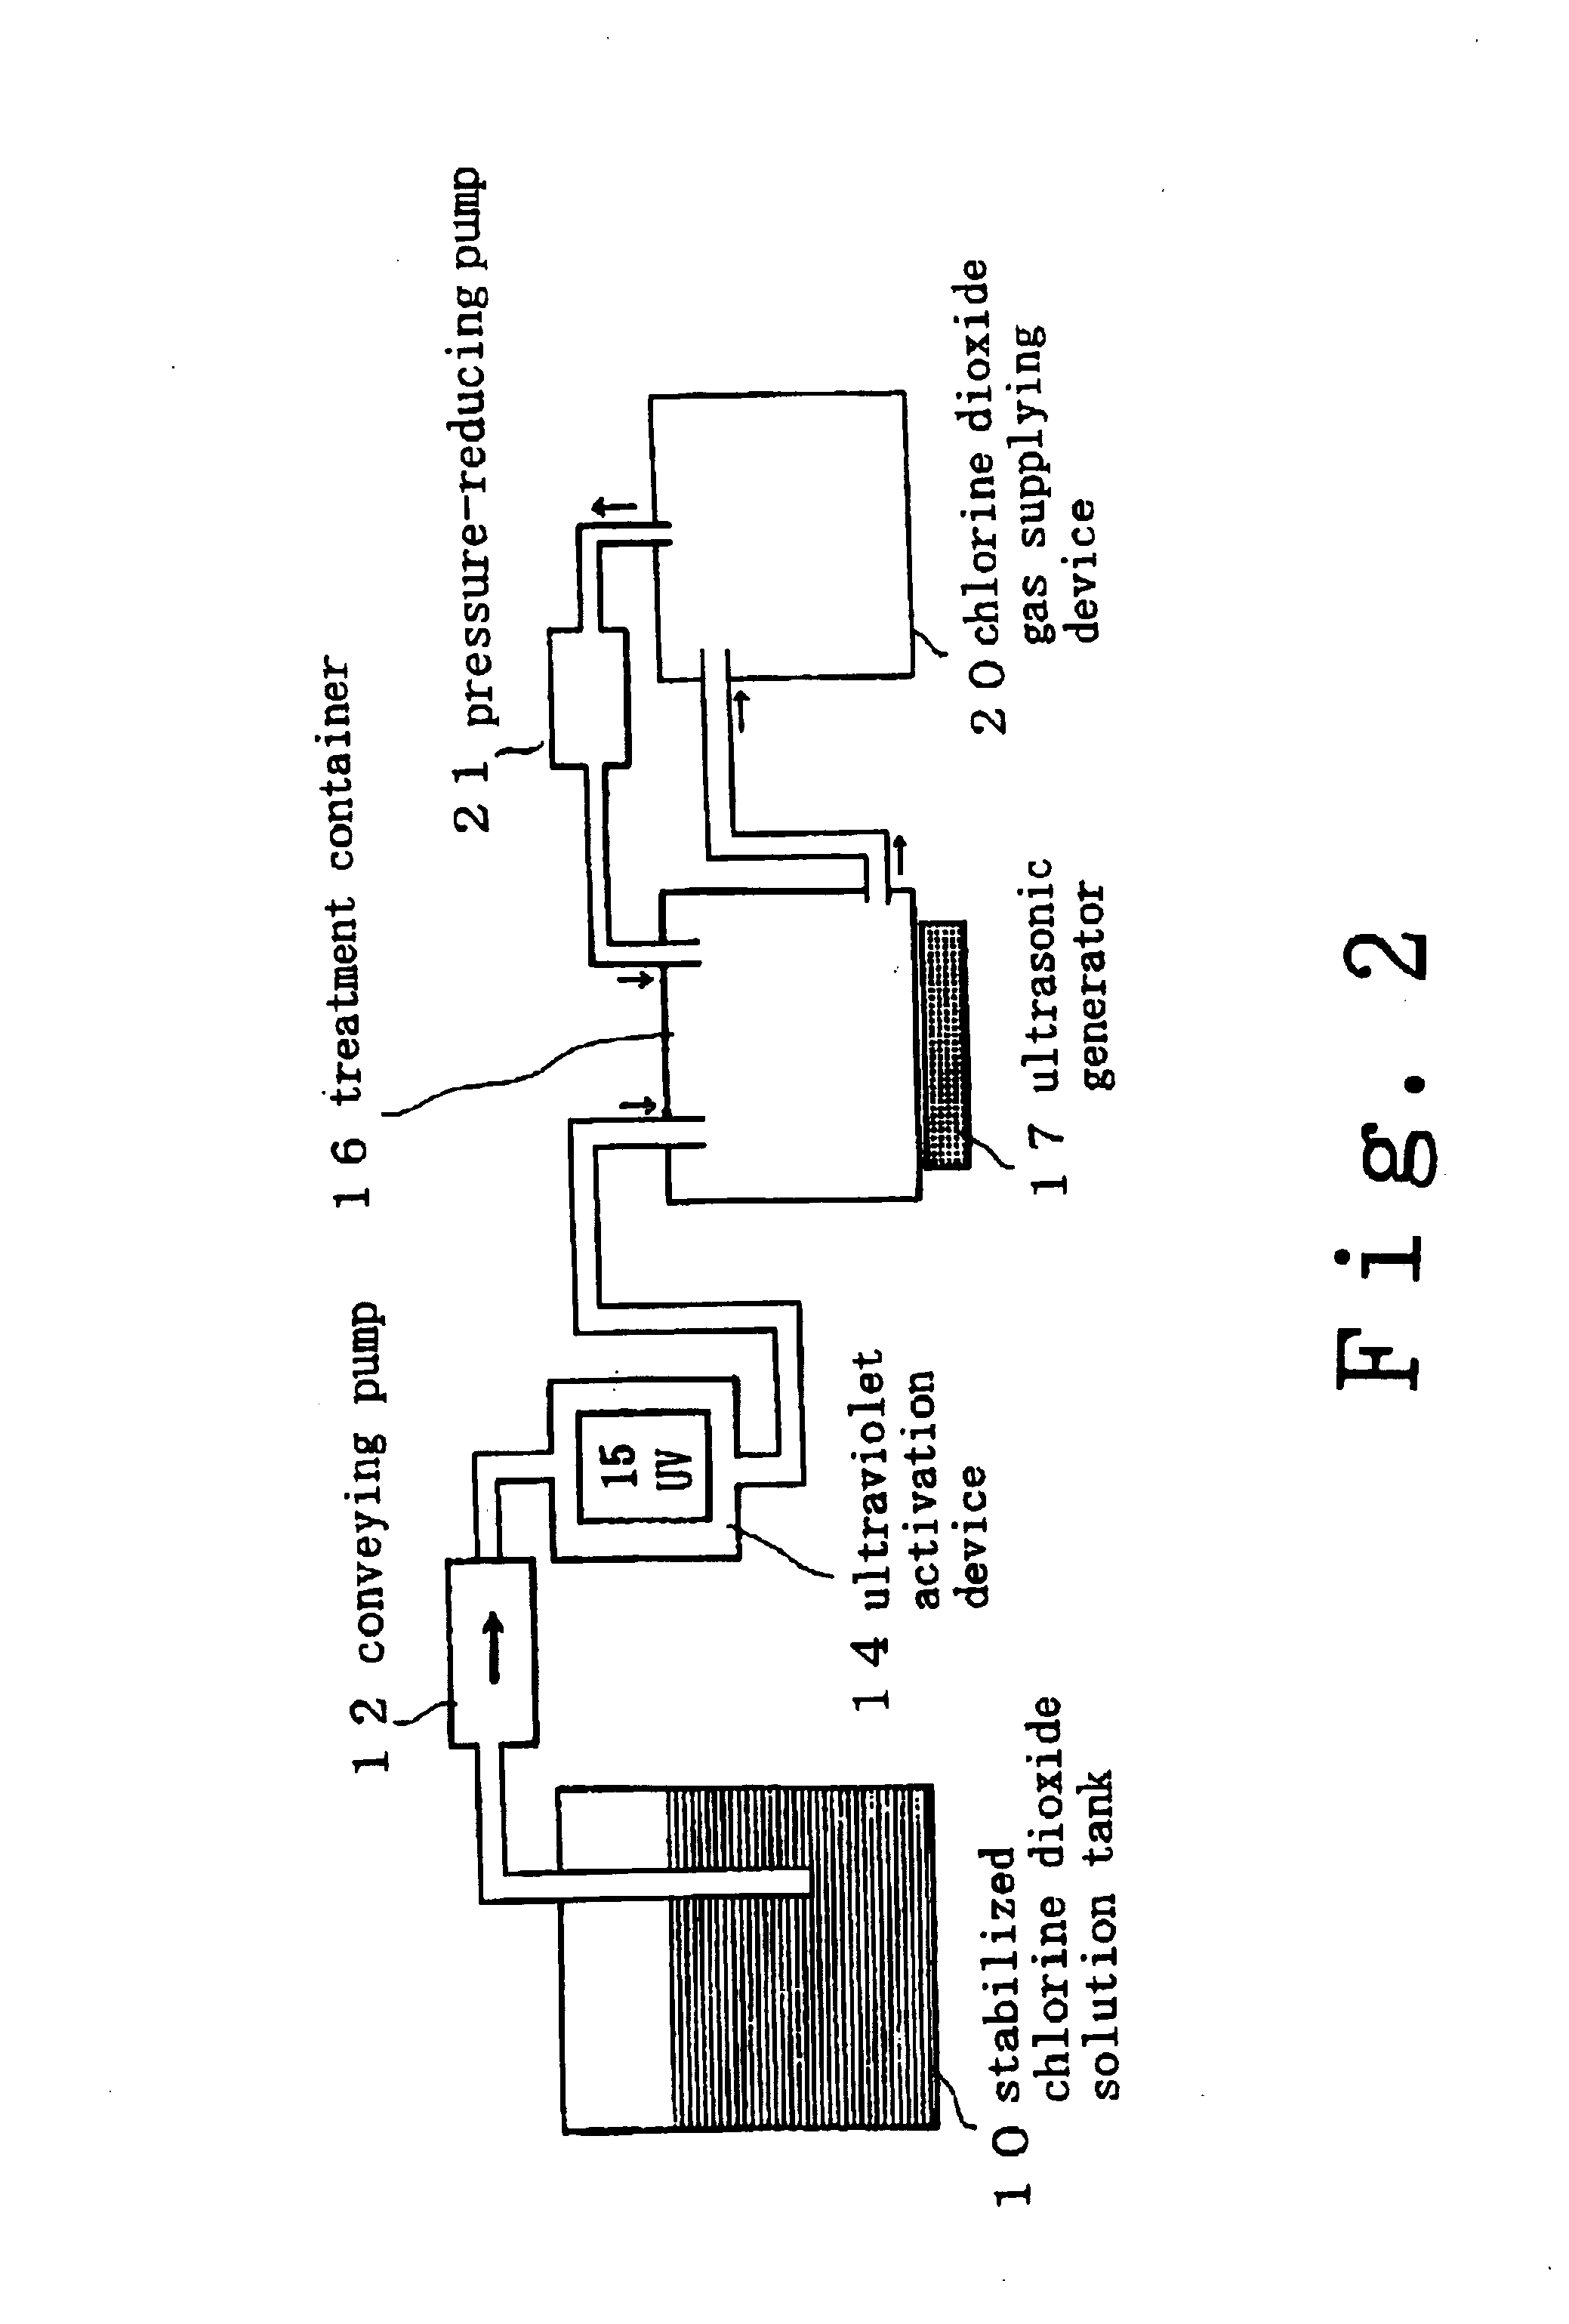 Method for cleaning and sterilizing medical equipment after use